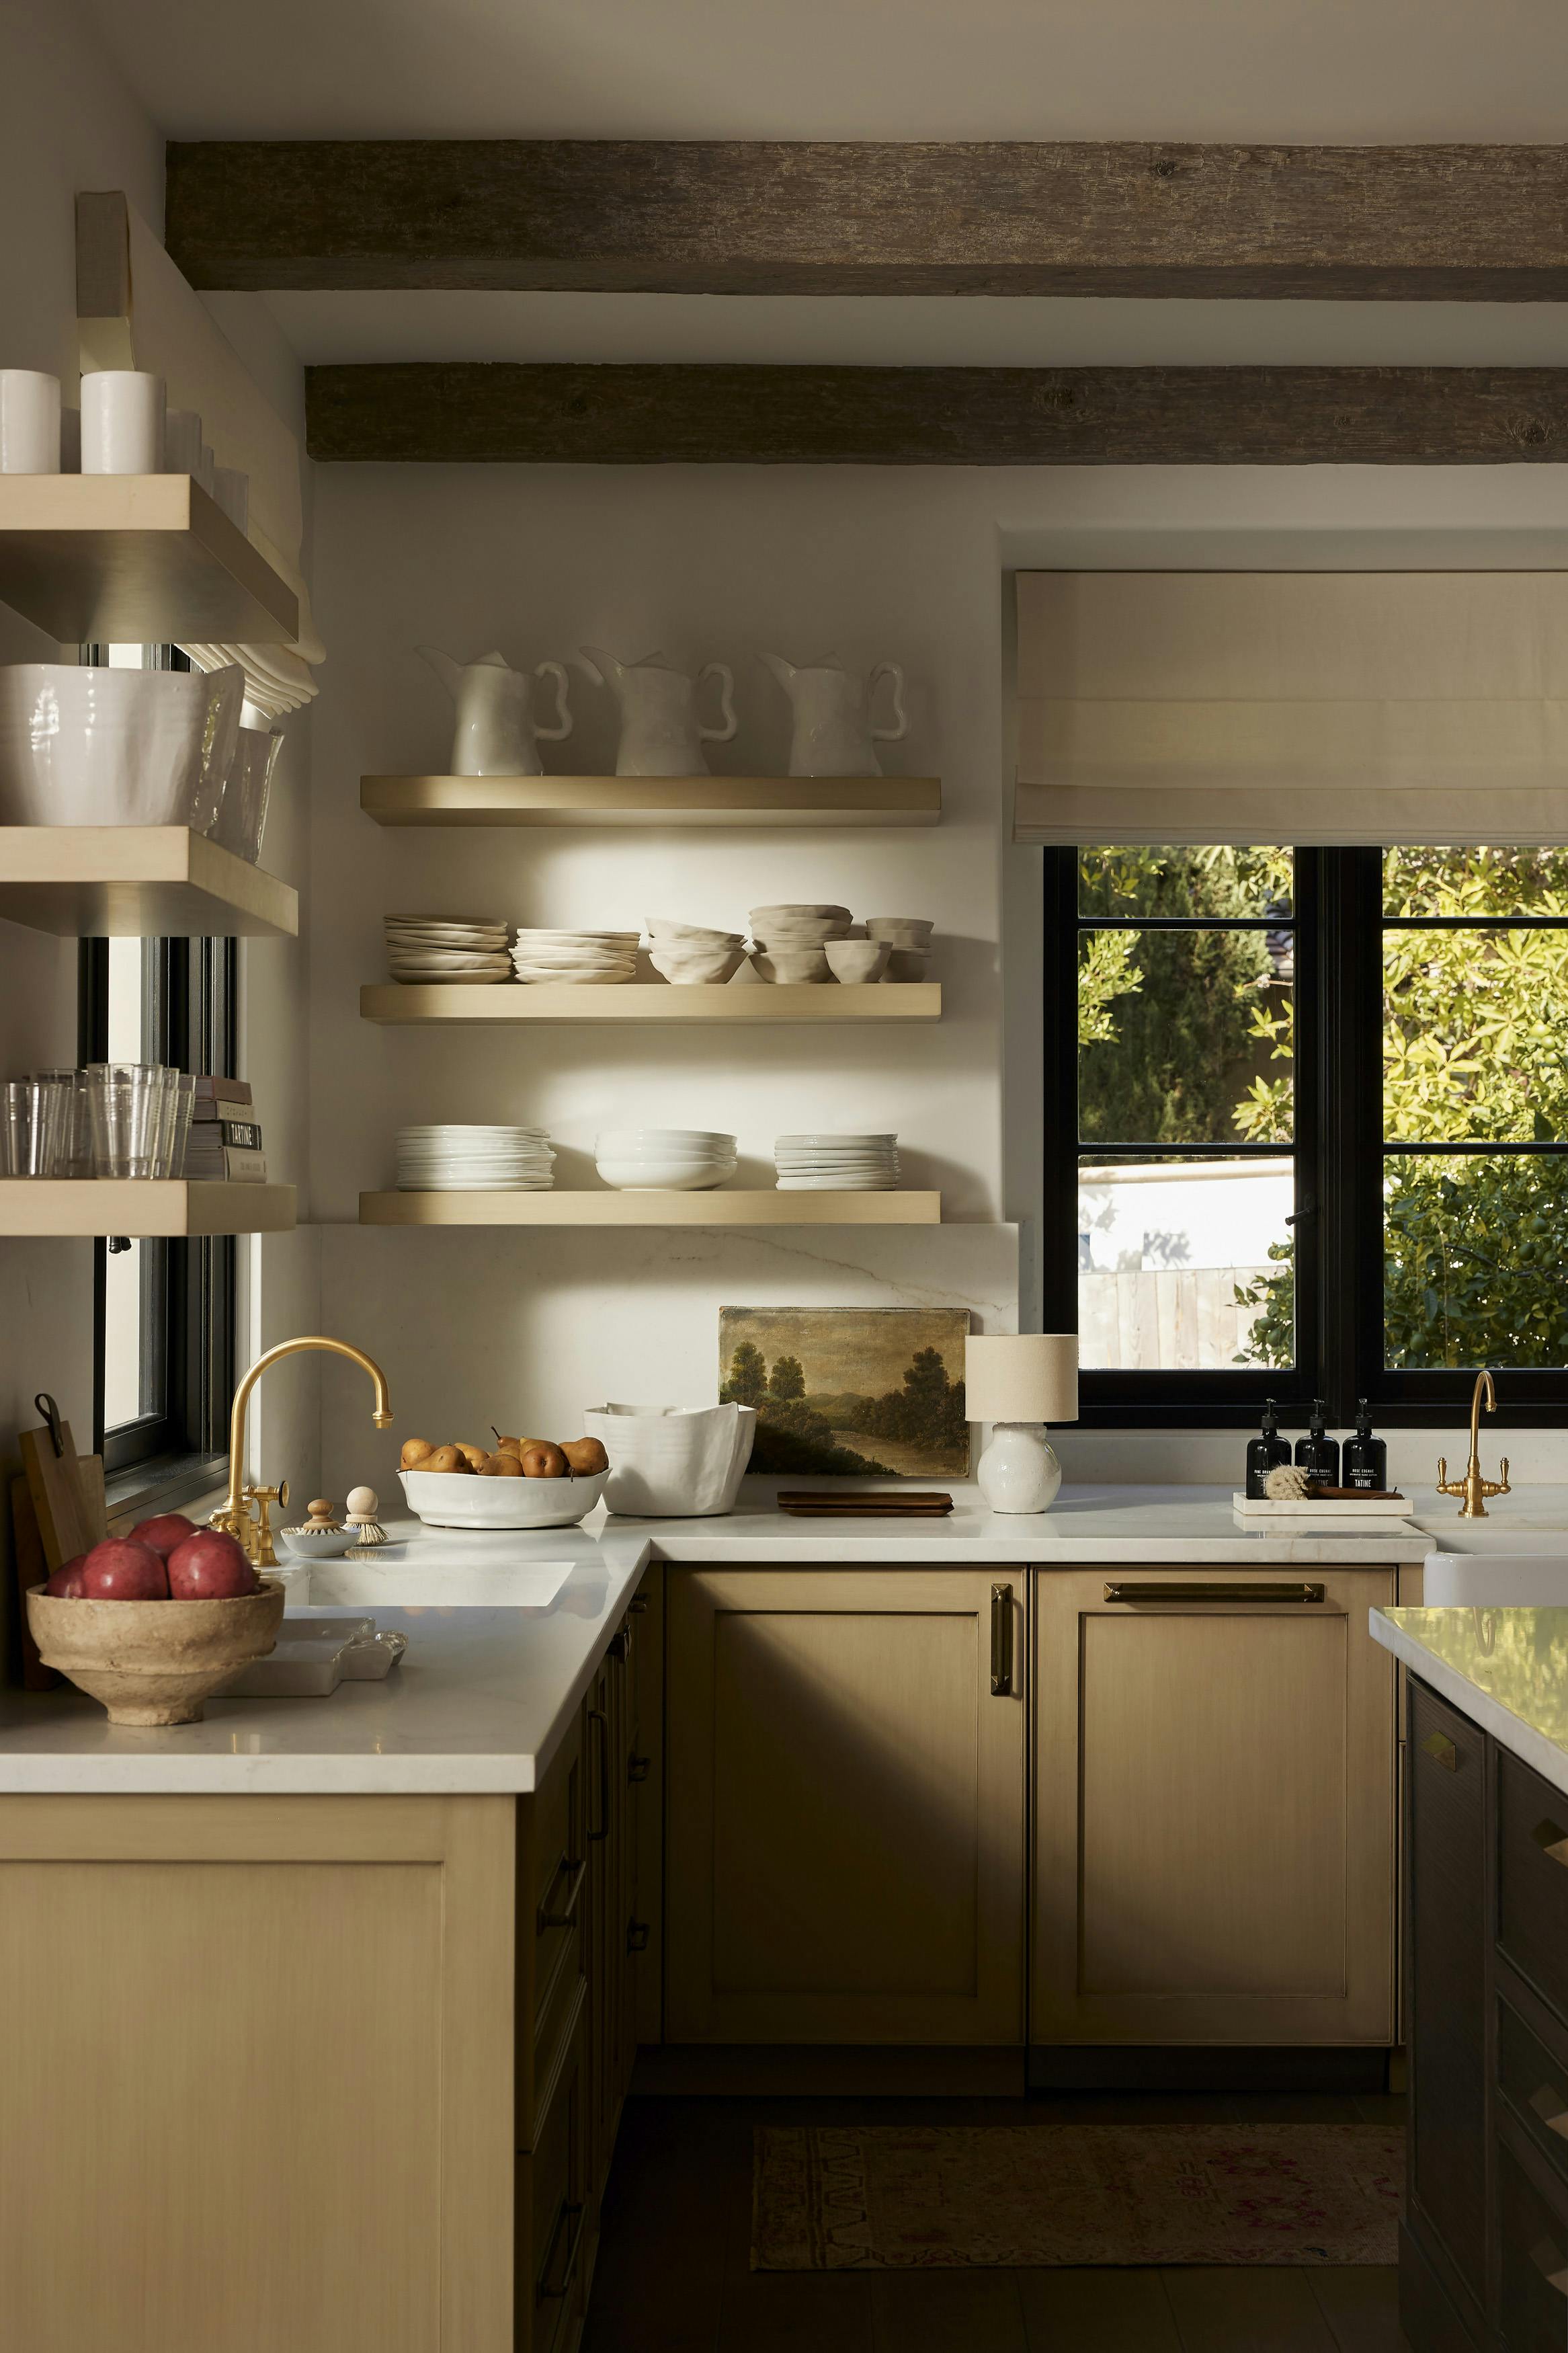 Nicole-Green-Design-Project-Shady-Canyon-Kitchen-Open-Shelves